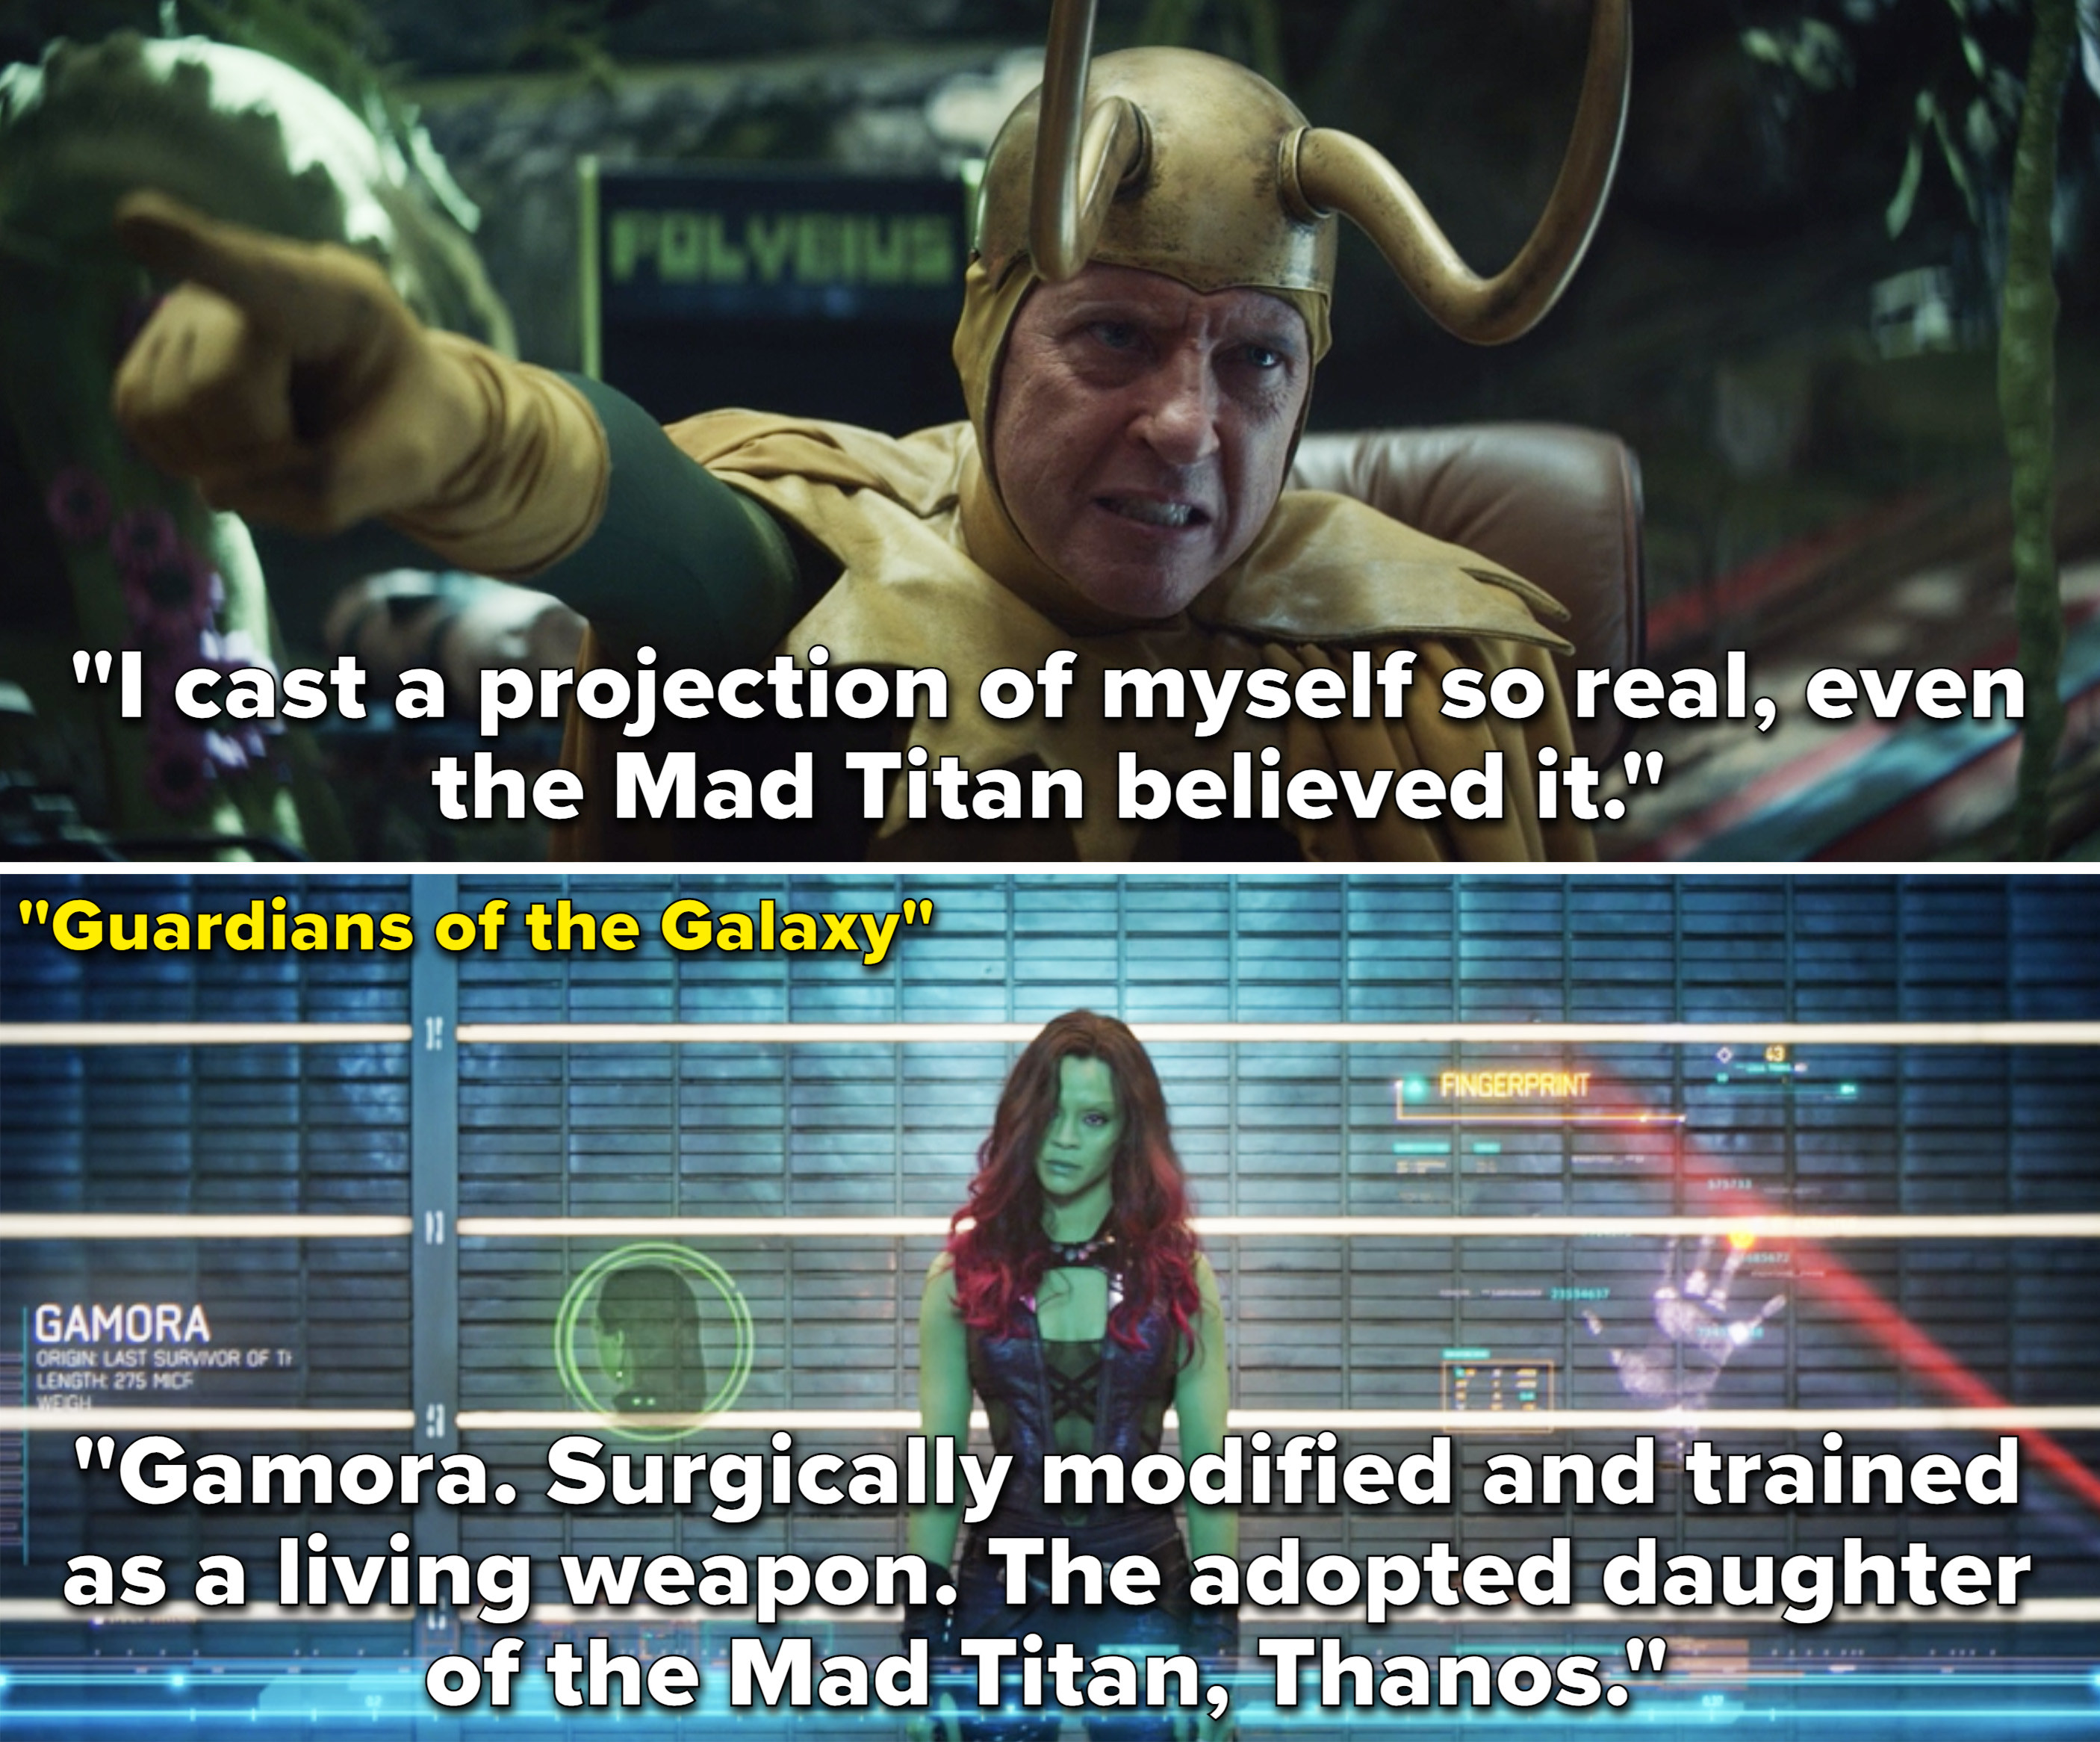 Classic Loki saying, &quot;I cast a projection of myself so real, even the Mad Titan believed it&quot; vs. Gamora being referred to as &quot;the adopted daughter of the Mad Titan&quot;